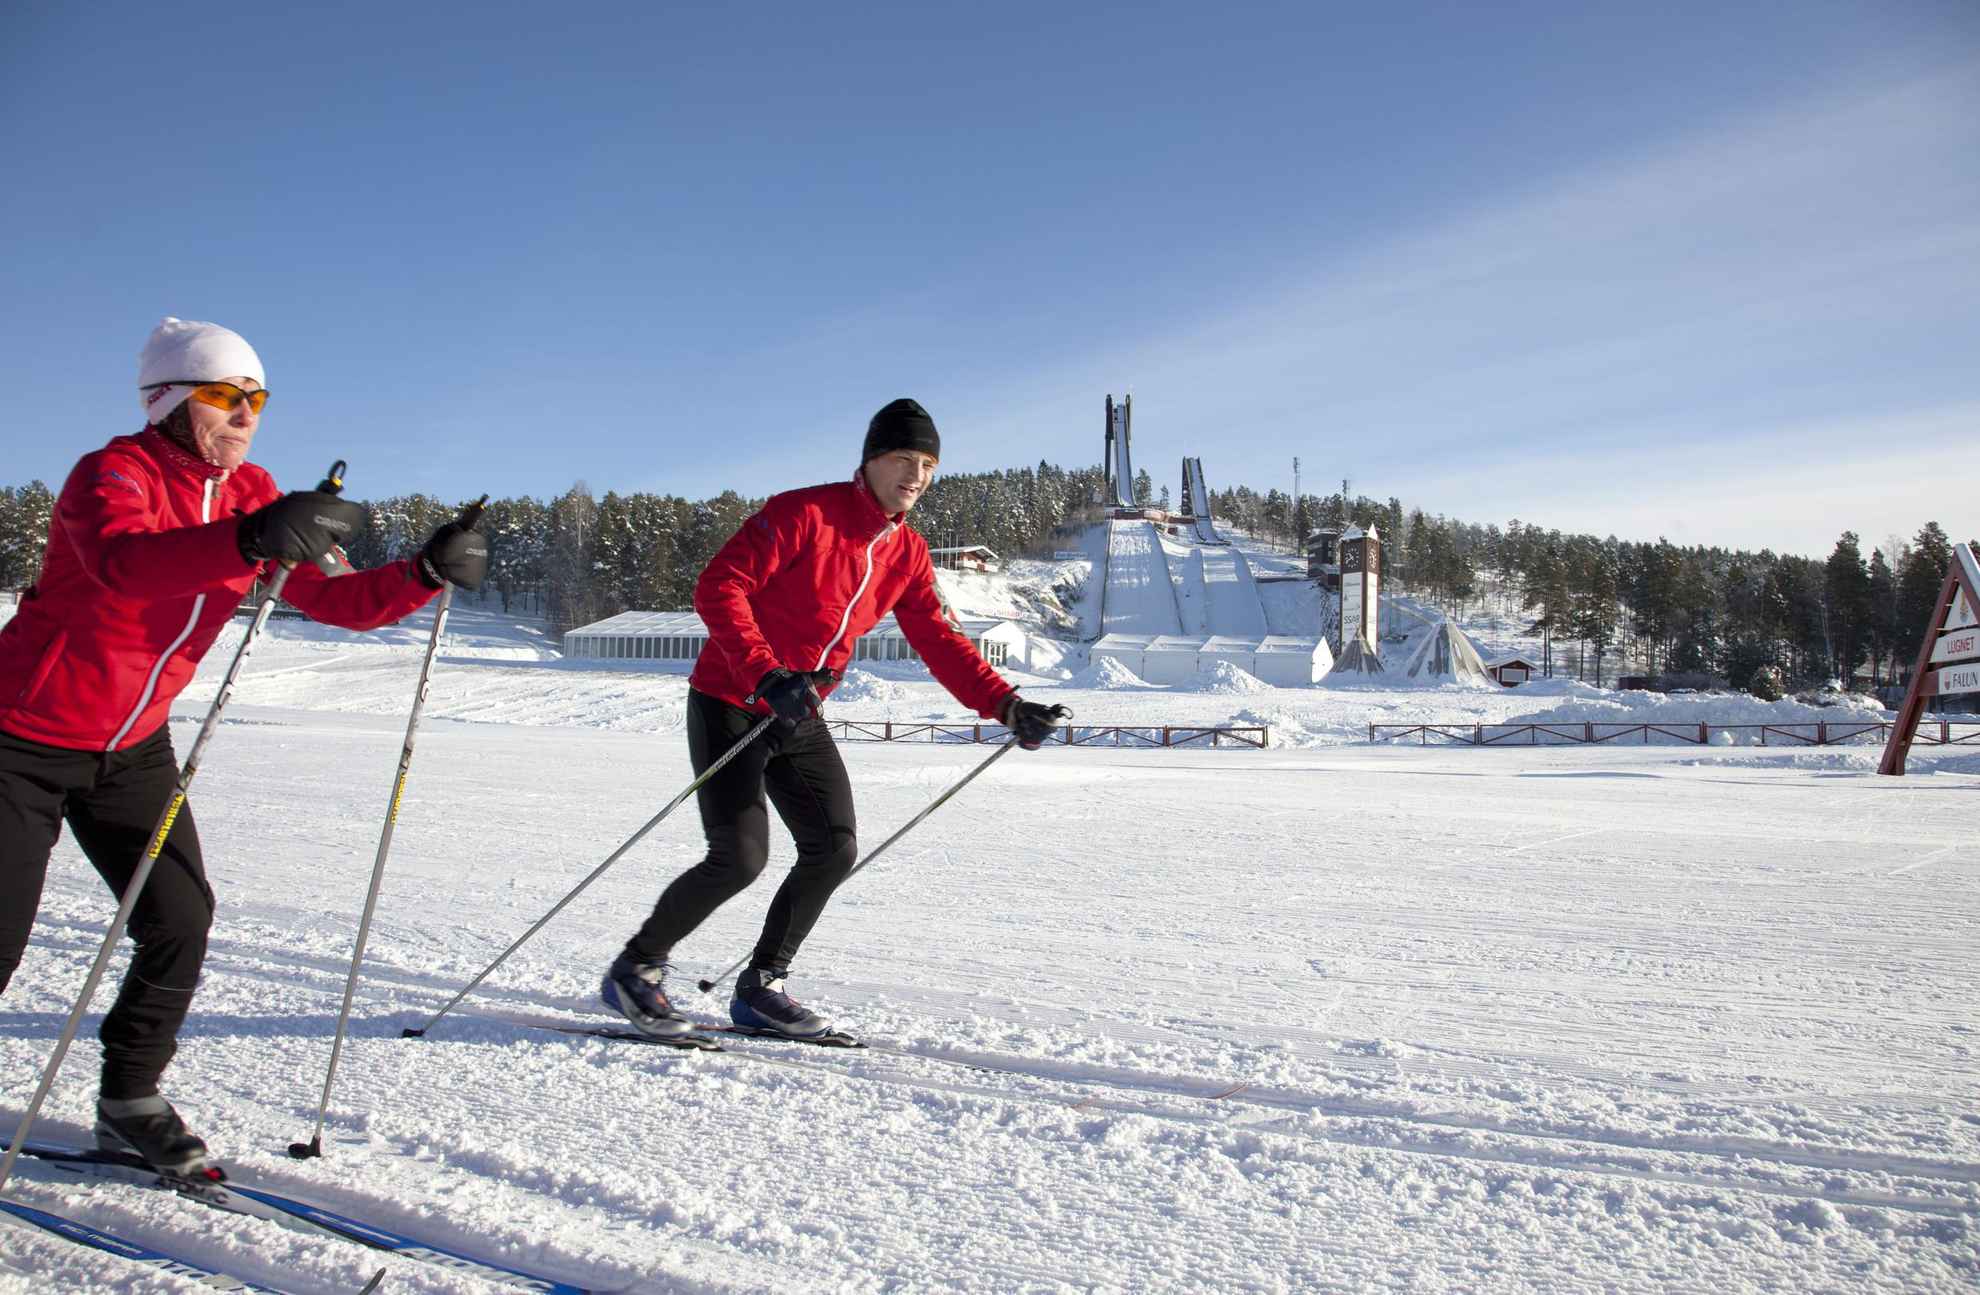 Two people in red jackets are cross-country skiing in prepared tracks.